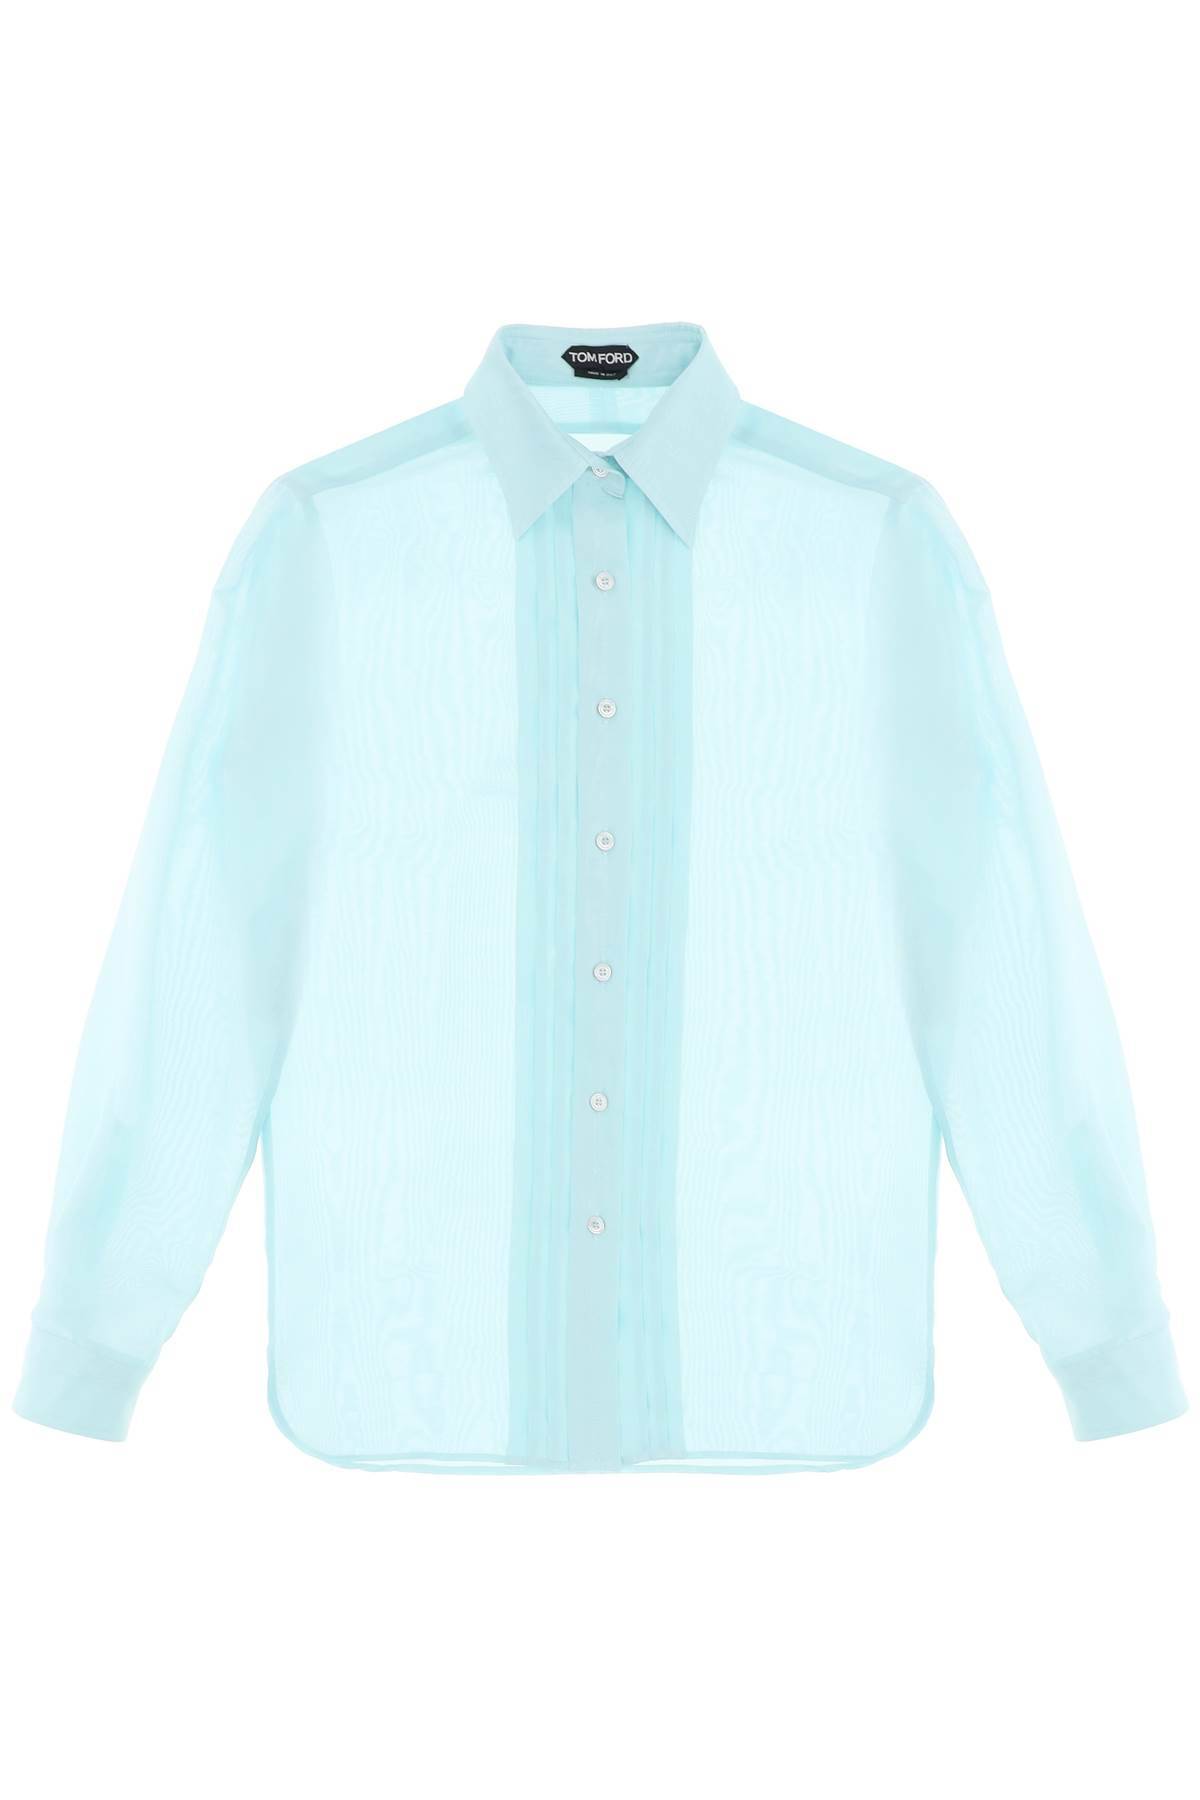 Tom Ford TOM FORD silk shirt with plastron